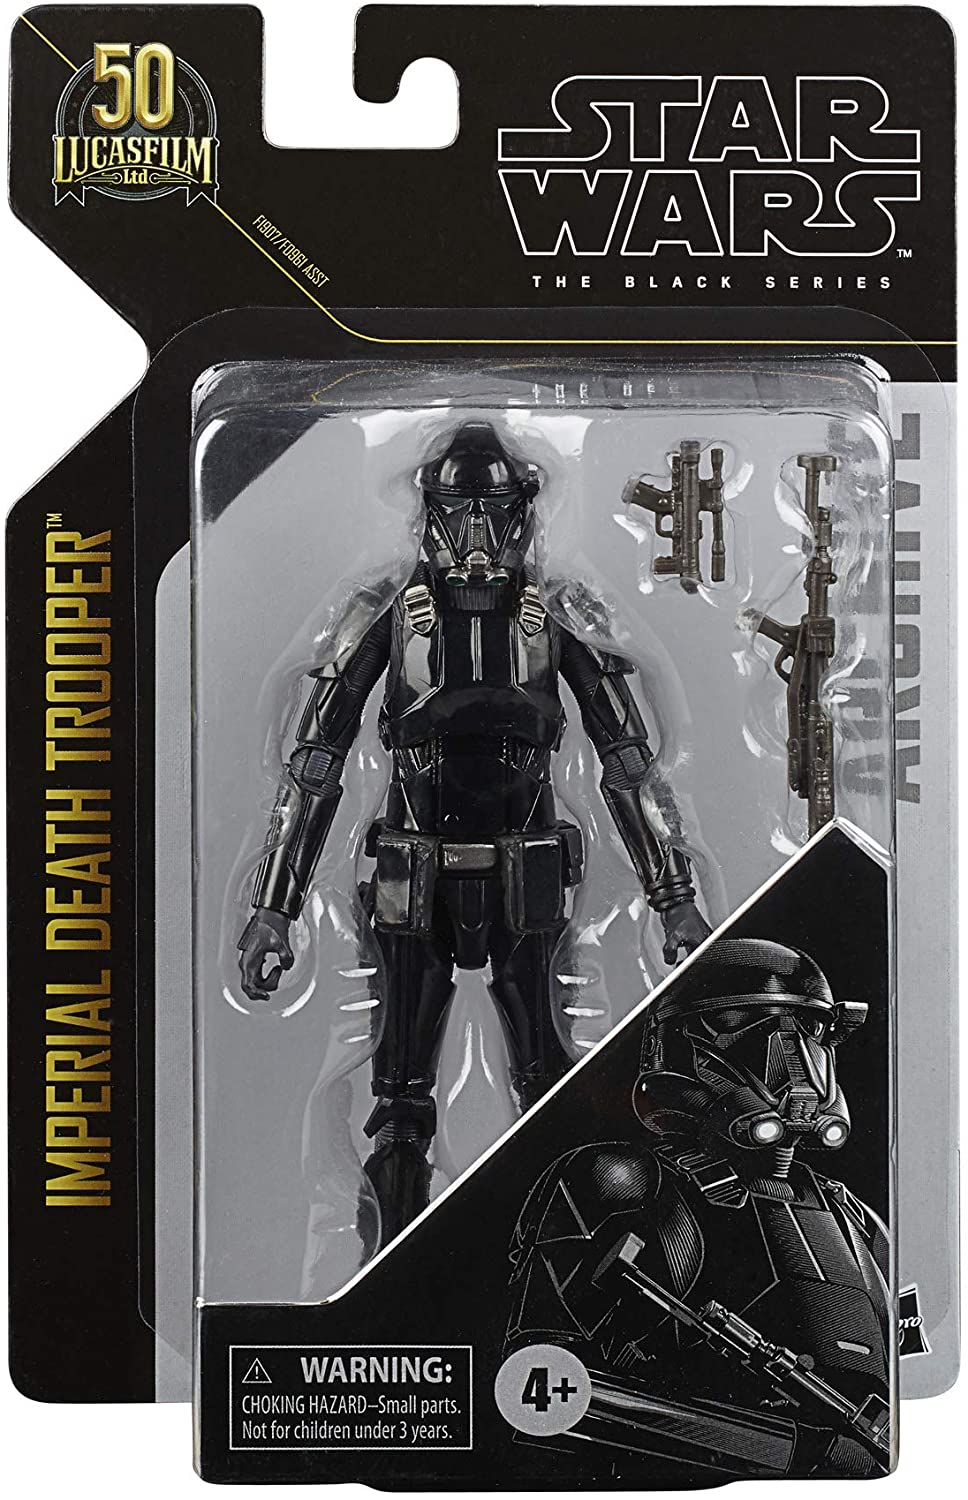 Star Wars The Black Series Archive 50th Lucasfilm Imperial Death Trooper 6' Action Figure - Hasbro